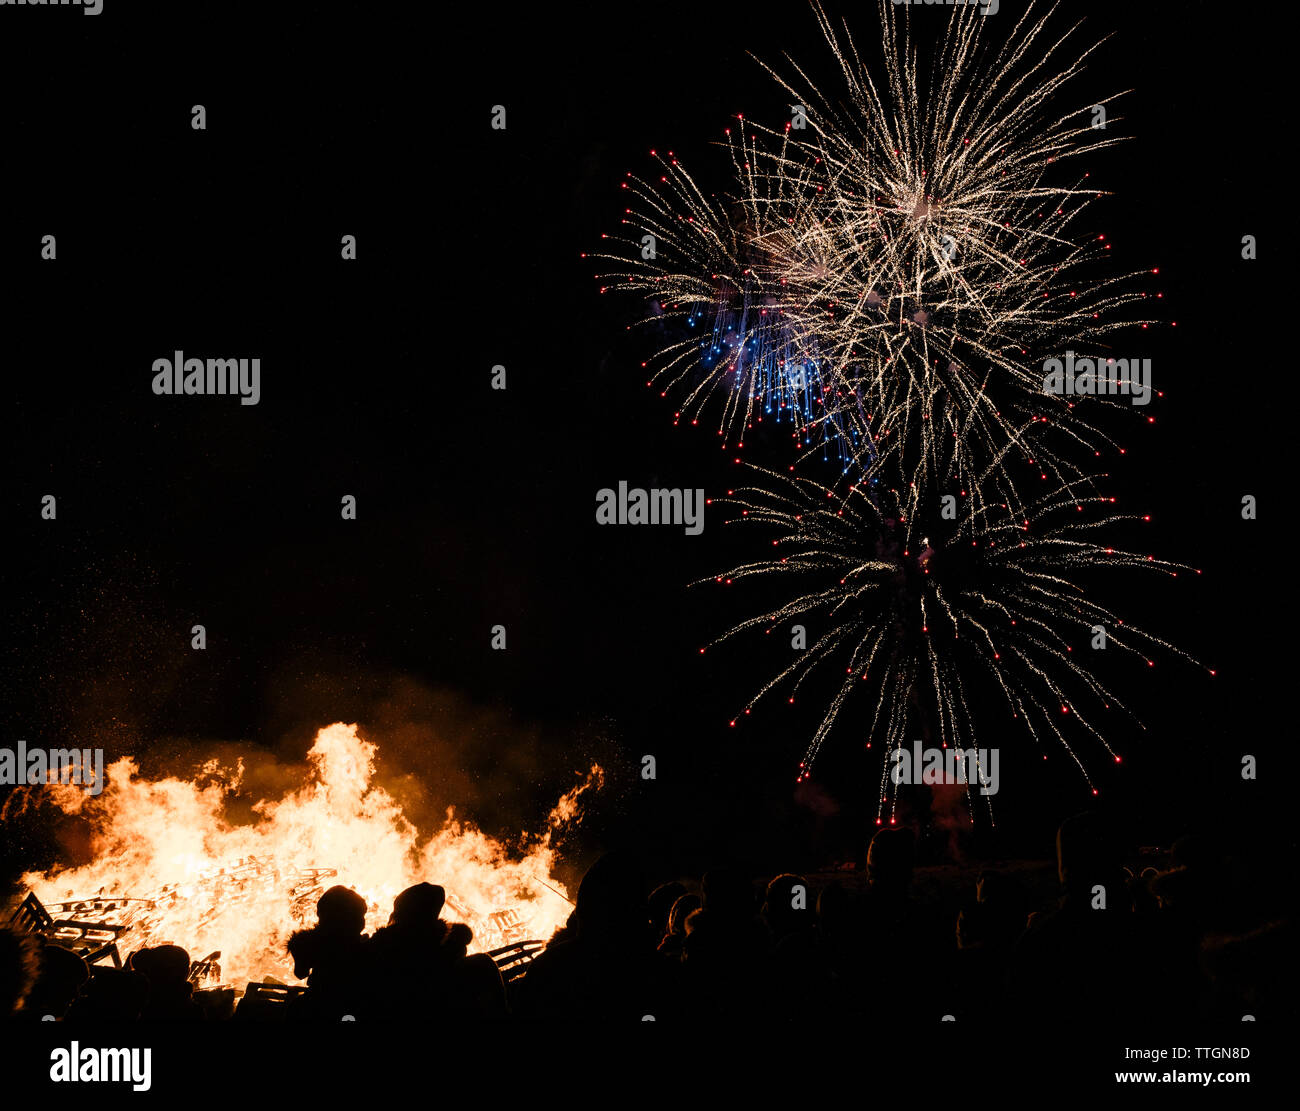 People near big fire between darkness and fireworks in sky Stock Photo